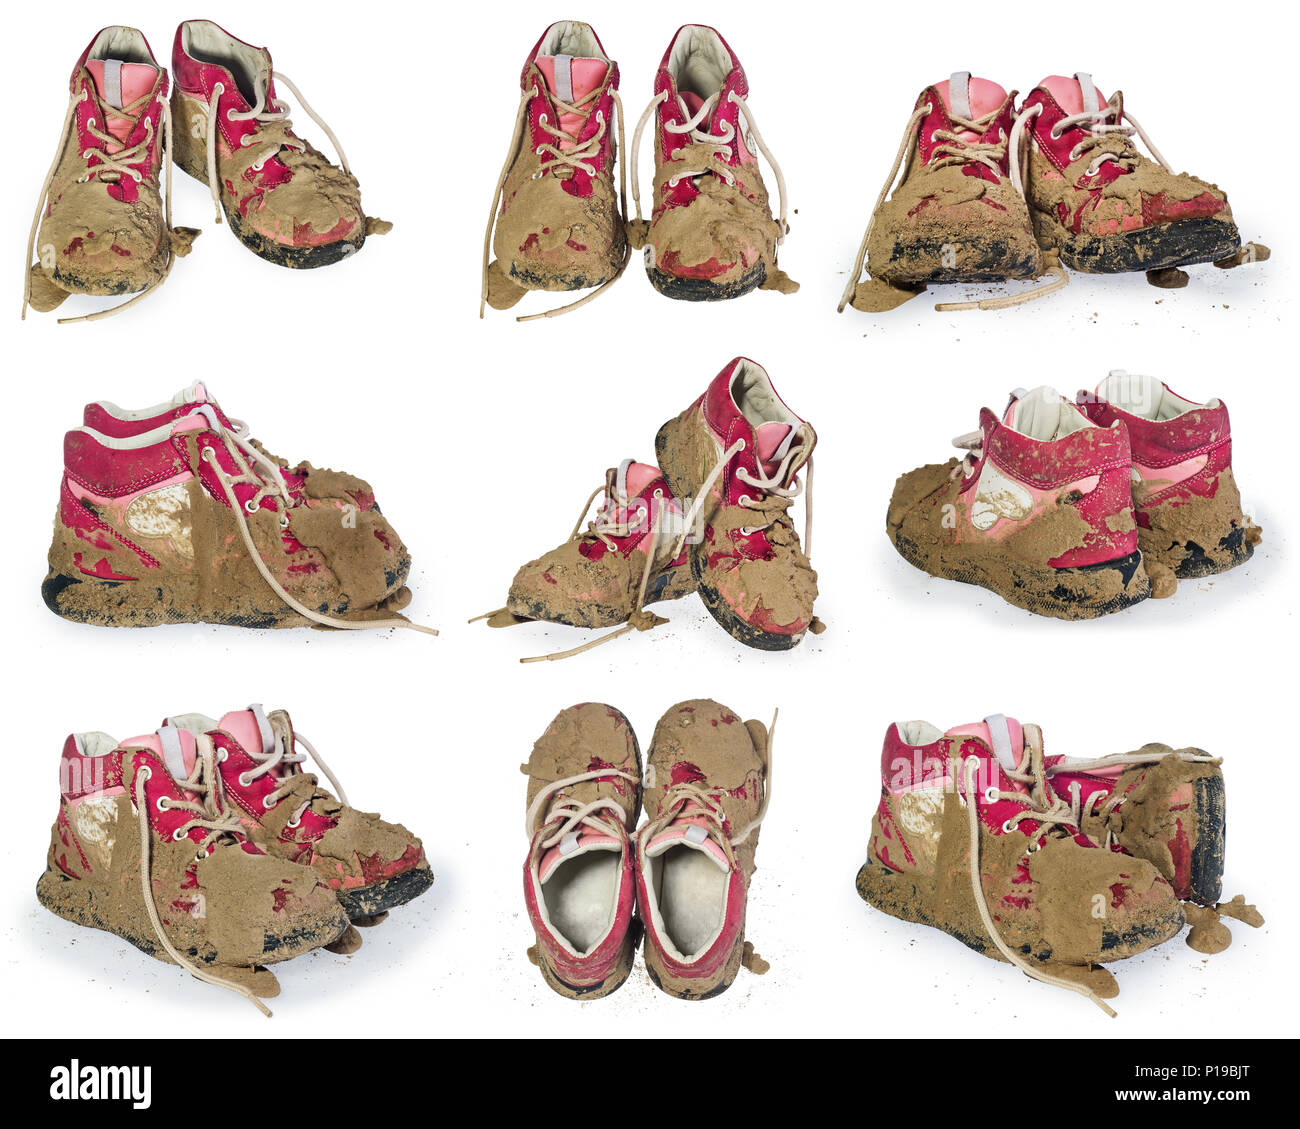 Children's tiny shoes covered with mud. Dirty leggings for children's feet in raspberry and white color isolated on a white background. Stock Photo